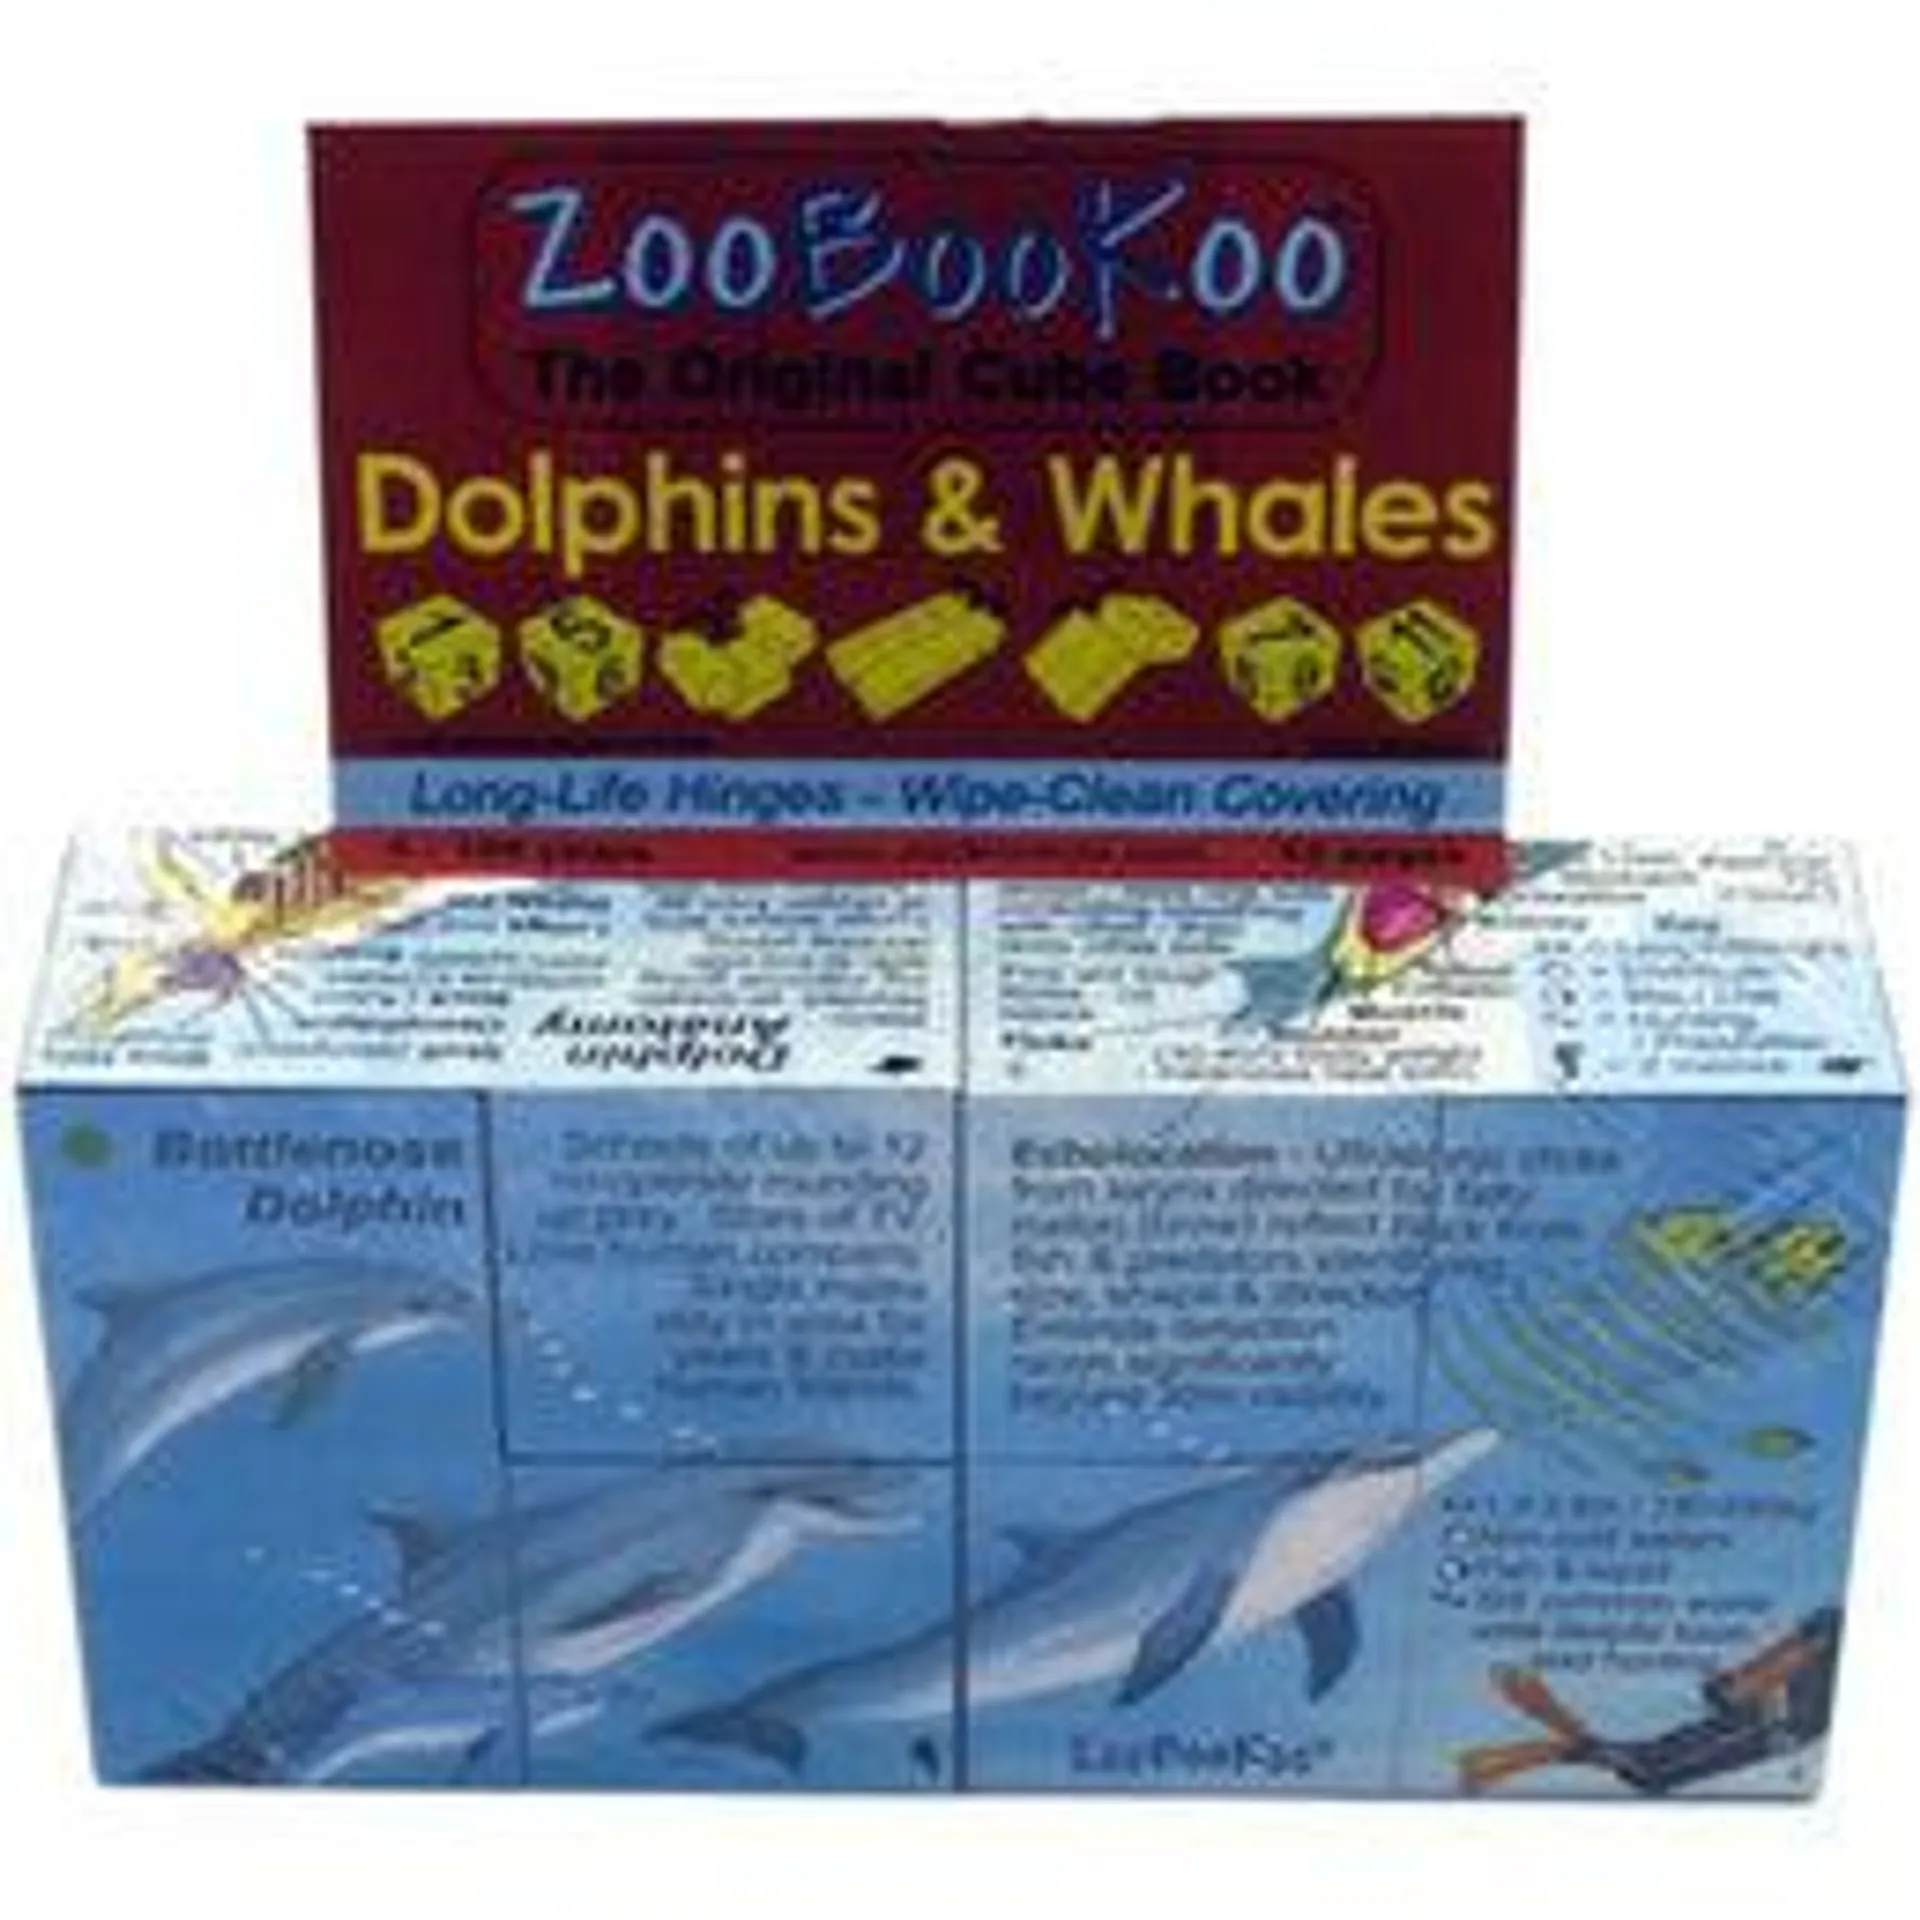 ZooBooKoo Dolphins & Whales